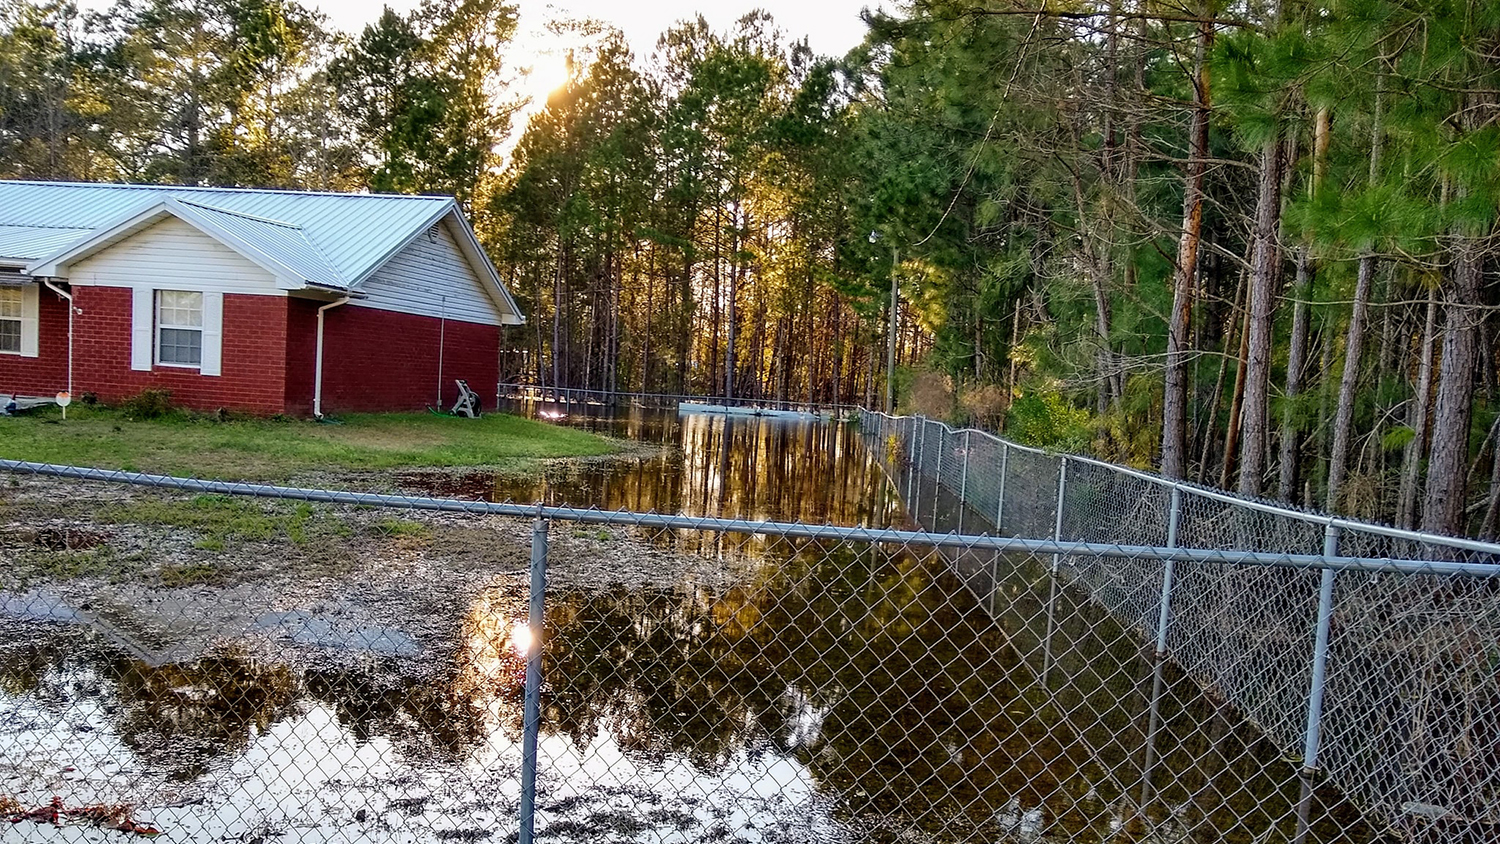 a red brick house is surrounded by flooding and a chainlink fence - Finding Floods from Space to Support Community Action - College of Natural Resources NC State University